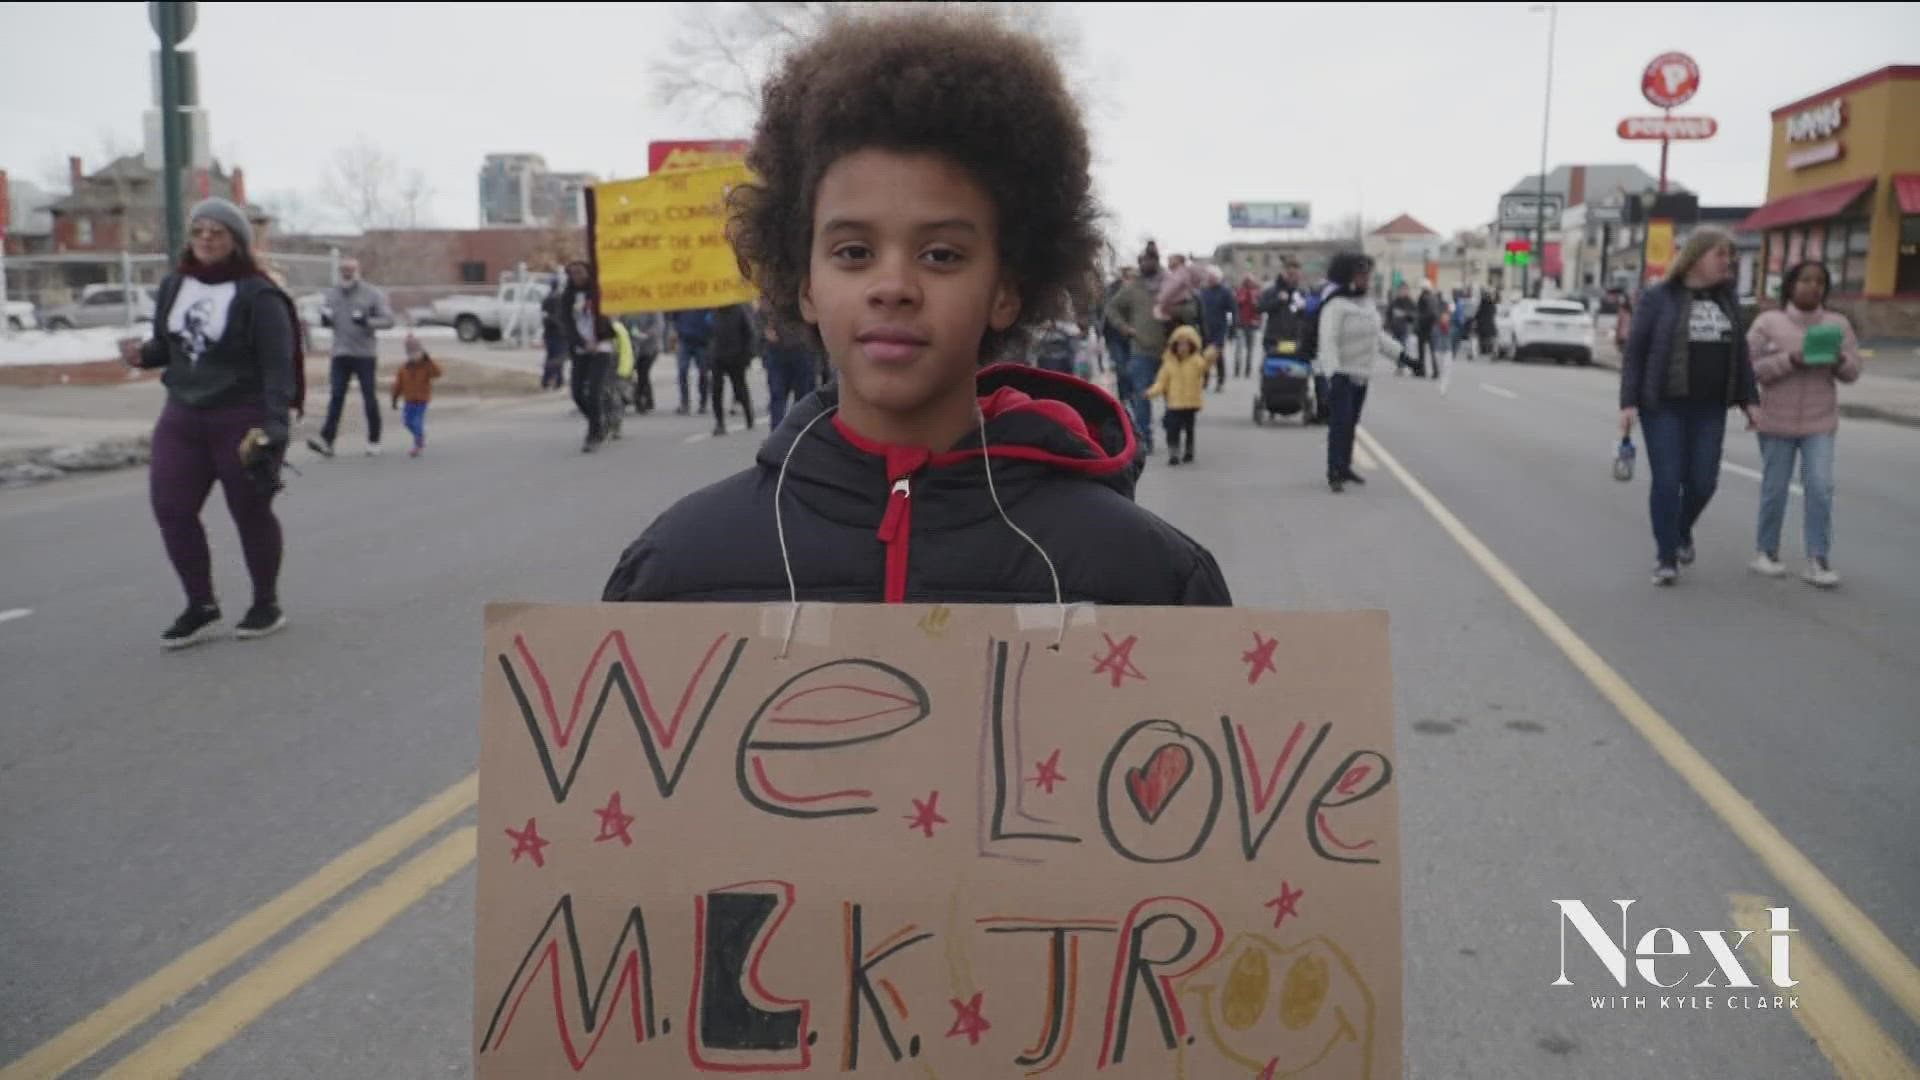 Thousands of people made their way through Denver for the annual Martin Luther King Jr. Day Marade. We asked Coloradans about what King's legacy means to them today.